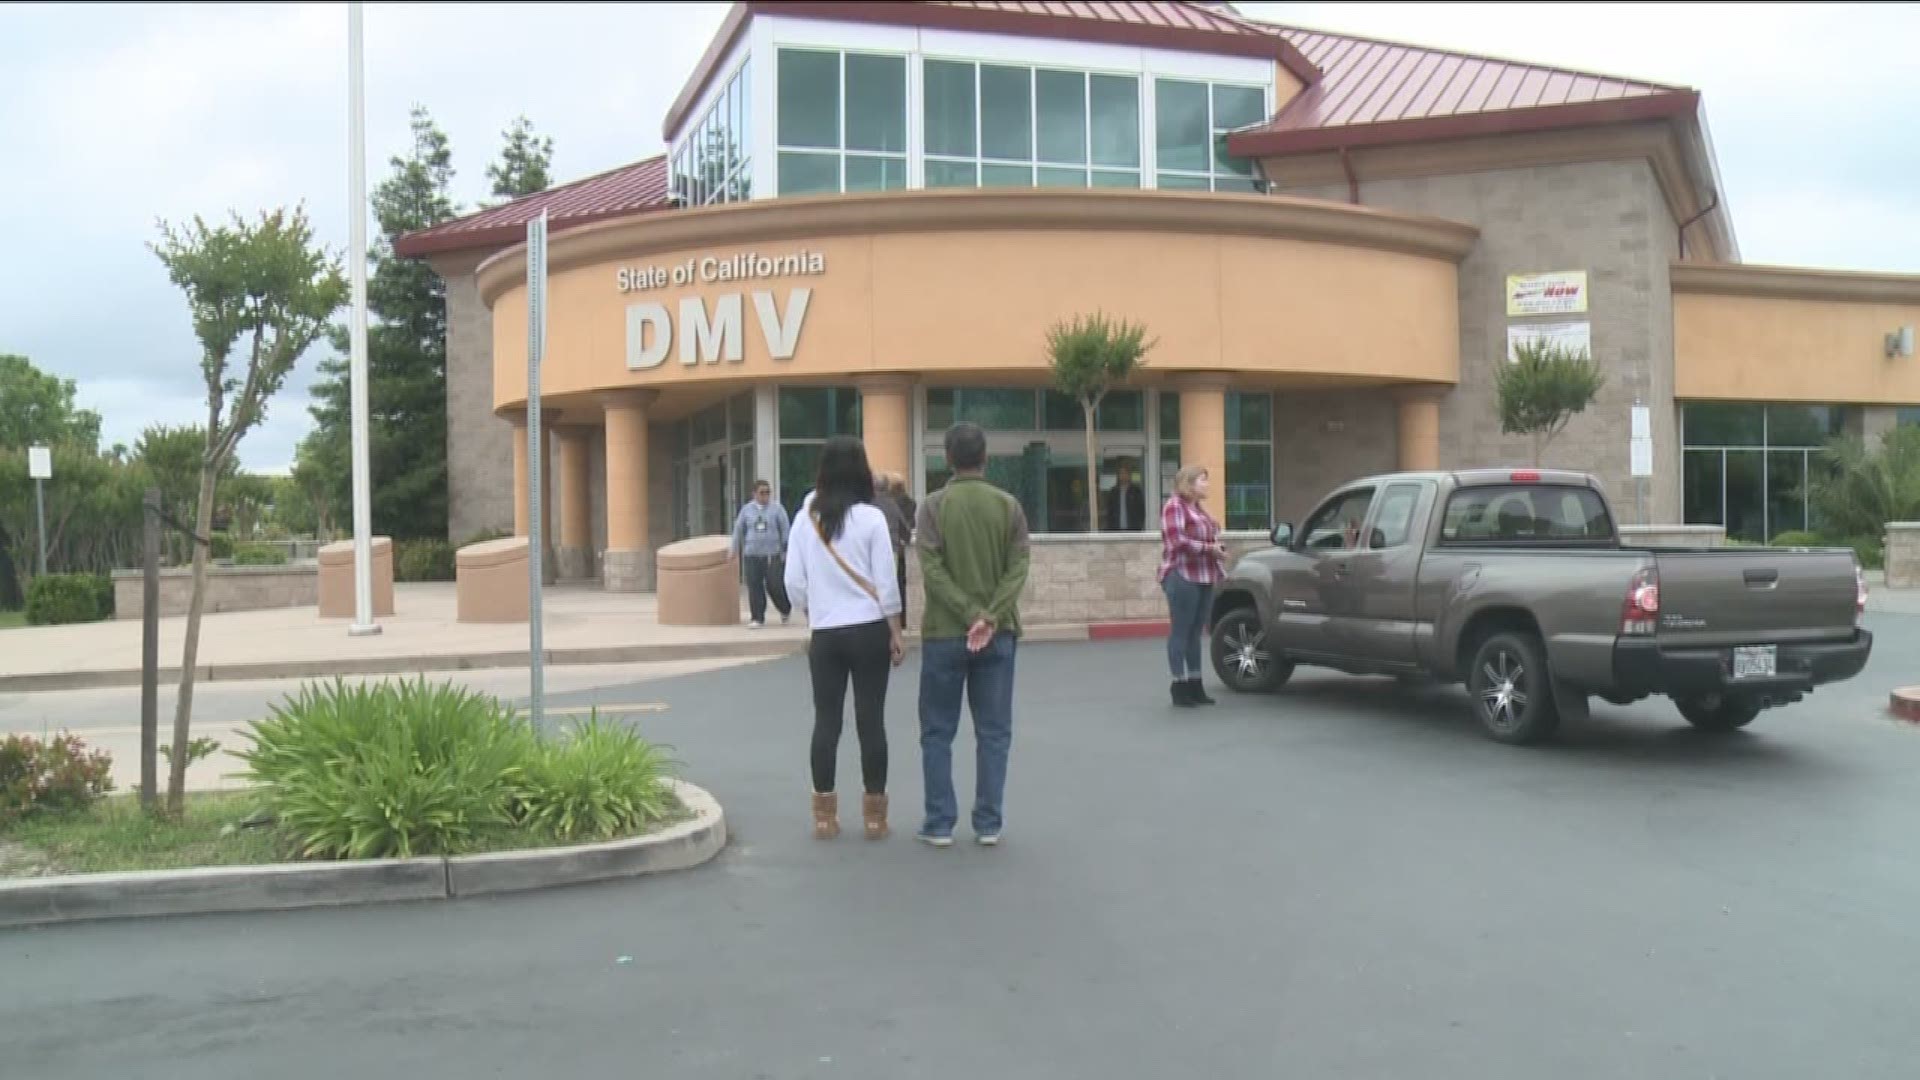 People trying to go to the south Sacramento DMV were turned away today, and the doors to that office are closed until further notice. (April 26, 2017)